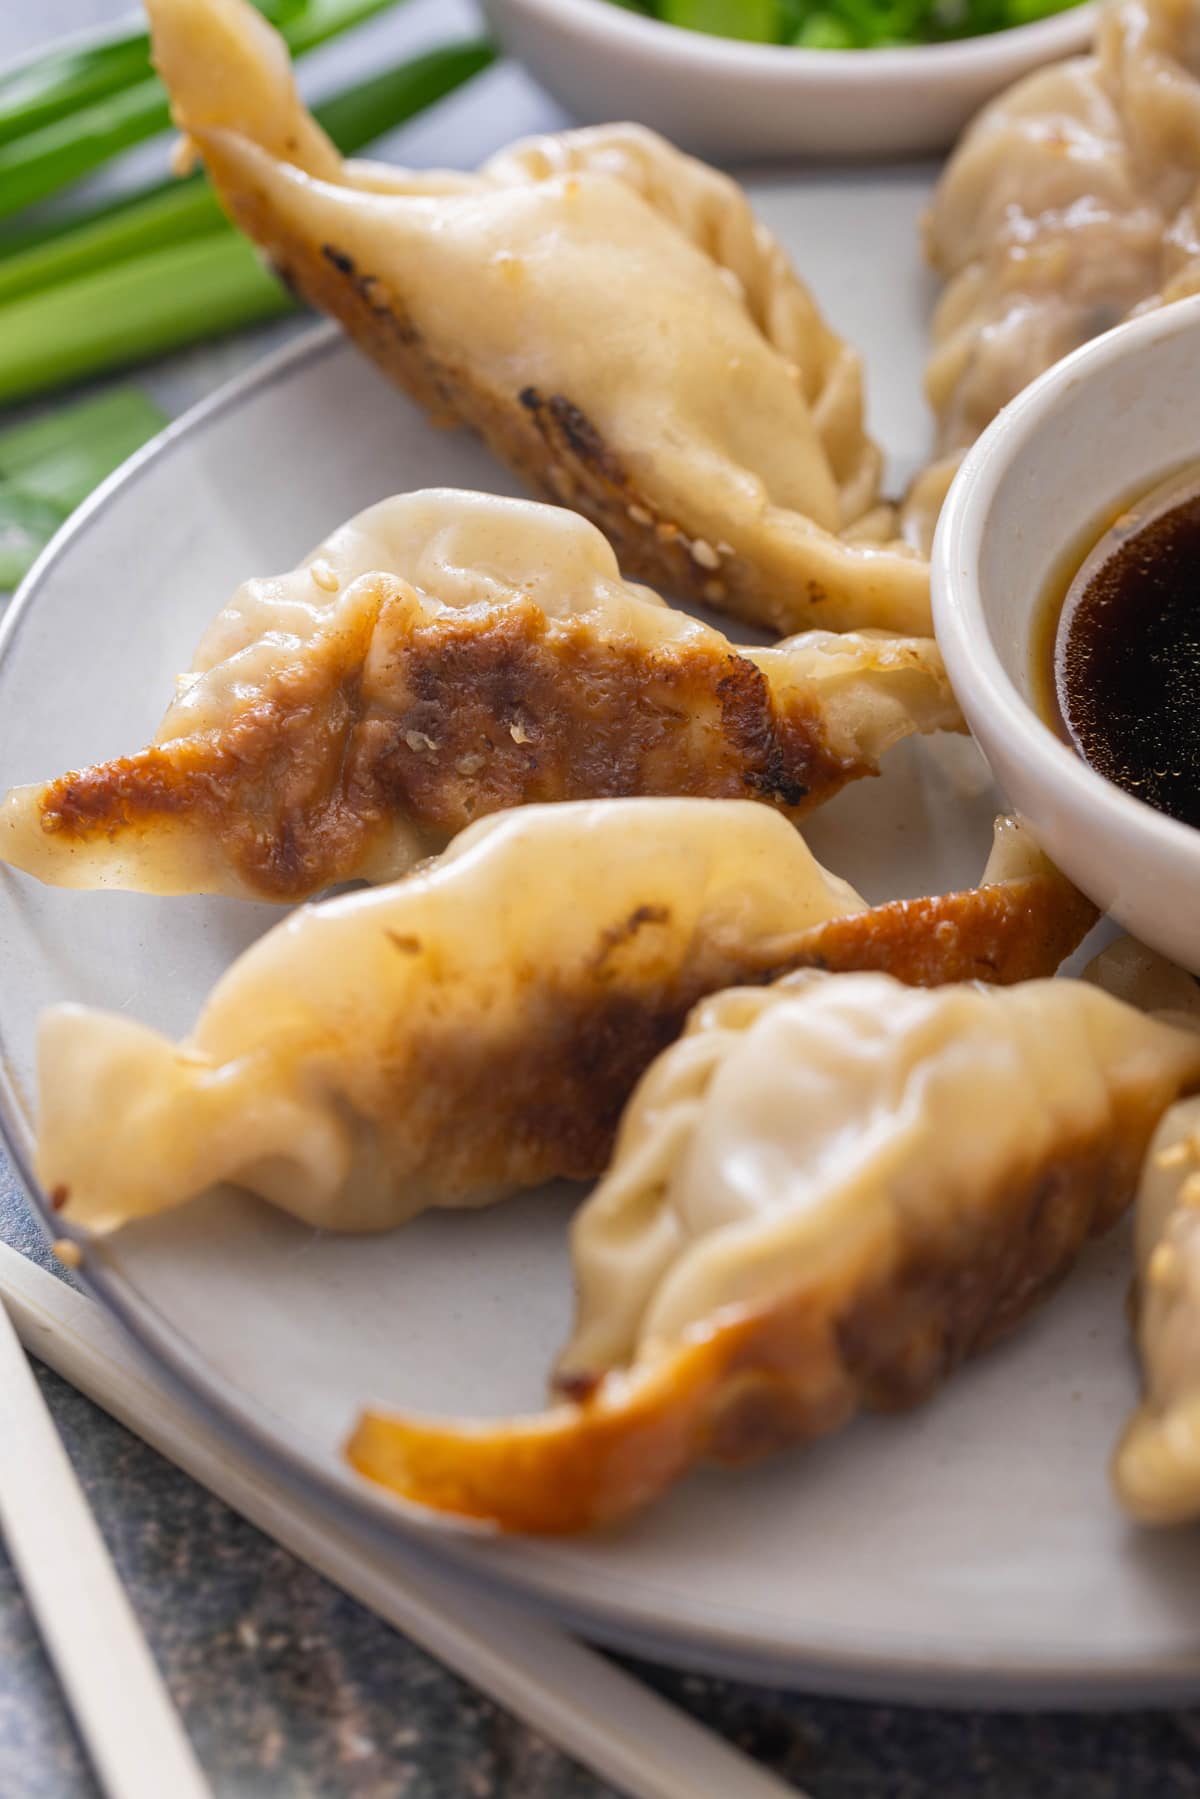 Homemade potstickers on a plate with a bowl of dipping sauce